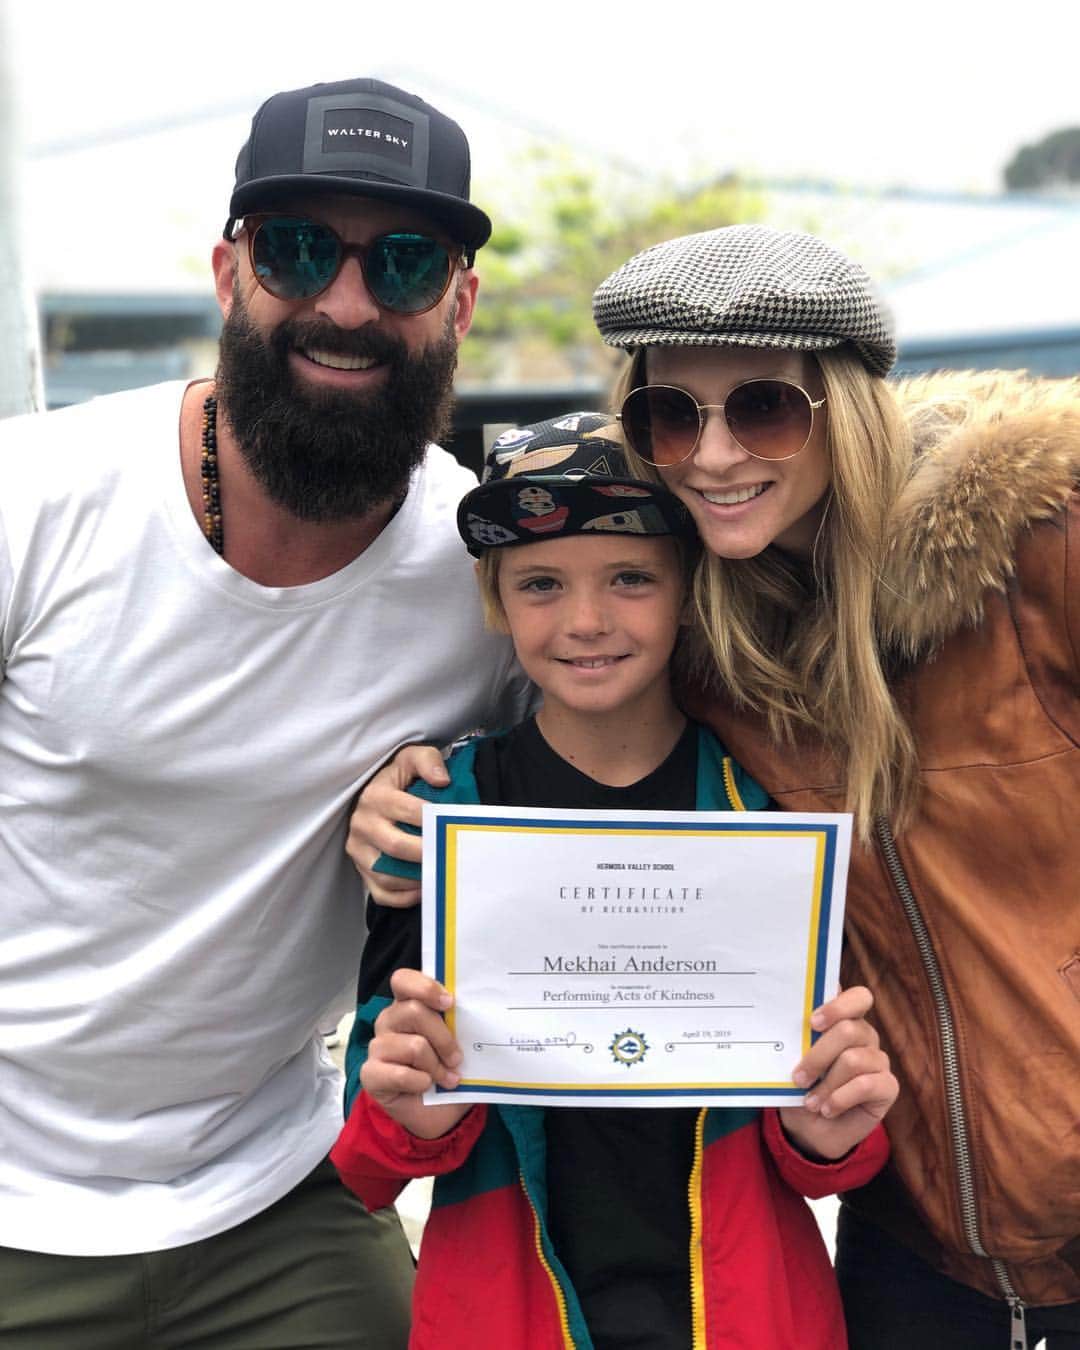 A・J・クックのインスタグラム：「This kid.....😍We could not be prouder parents. Mekhai was honored today at school for his kindness. I mean......😭💗💕☺️#proudmom #proudparents @nathanandy」